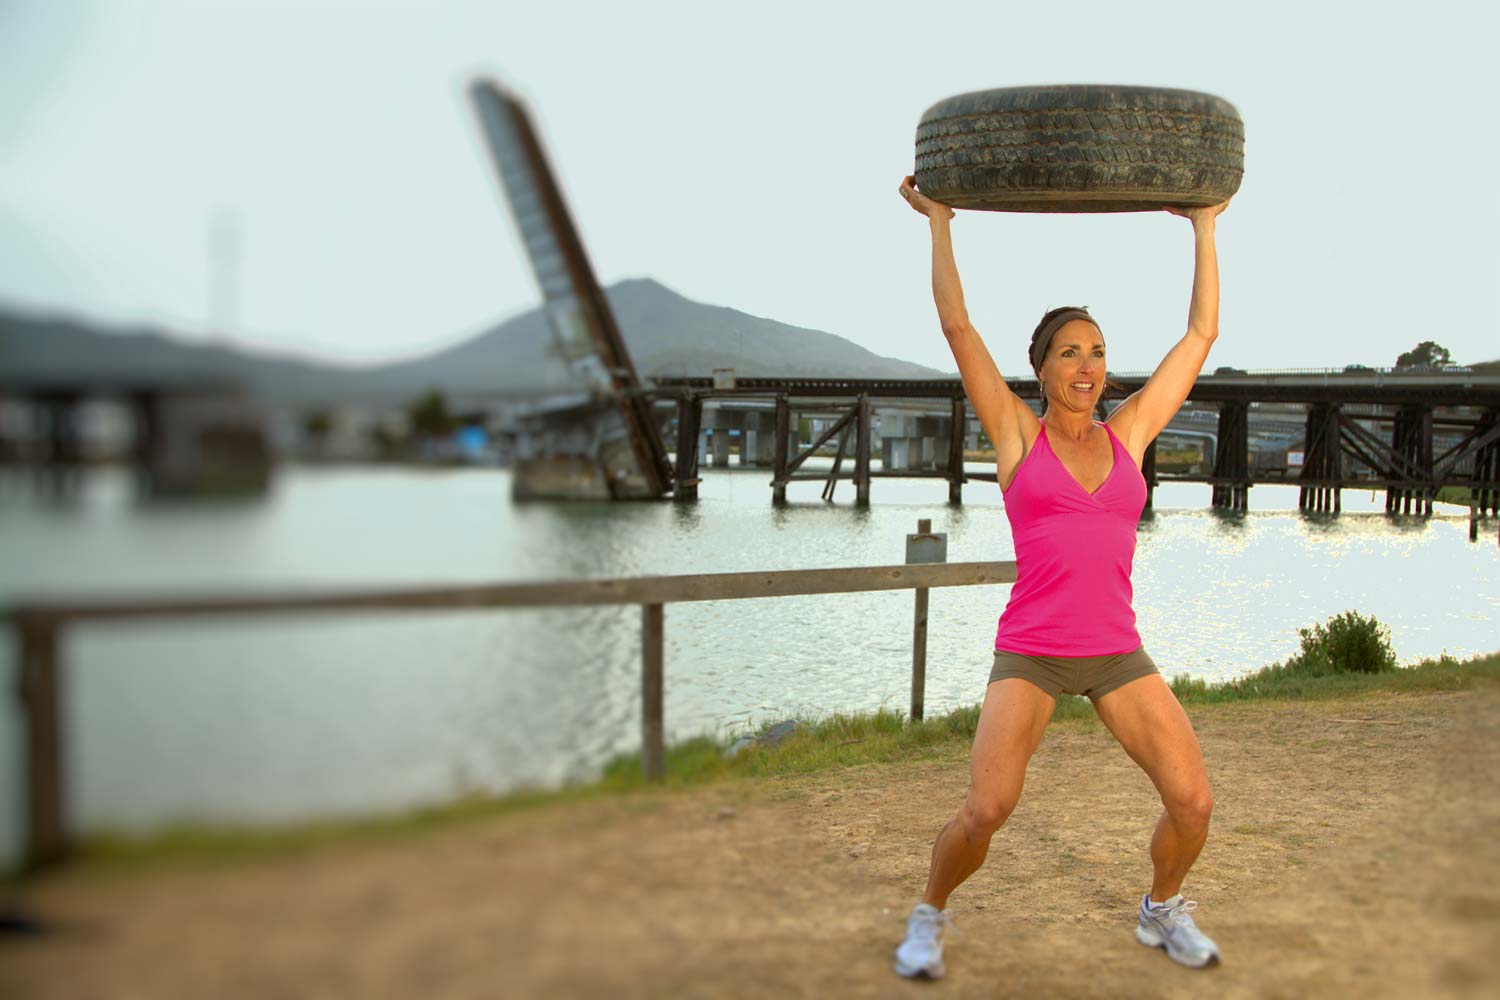 Beyond Fitness creator Michele Vaughan shows her strength and technique while lifting a tire overhead